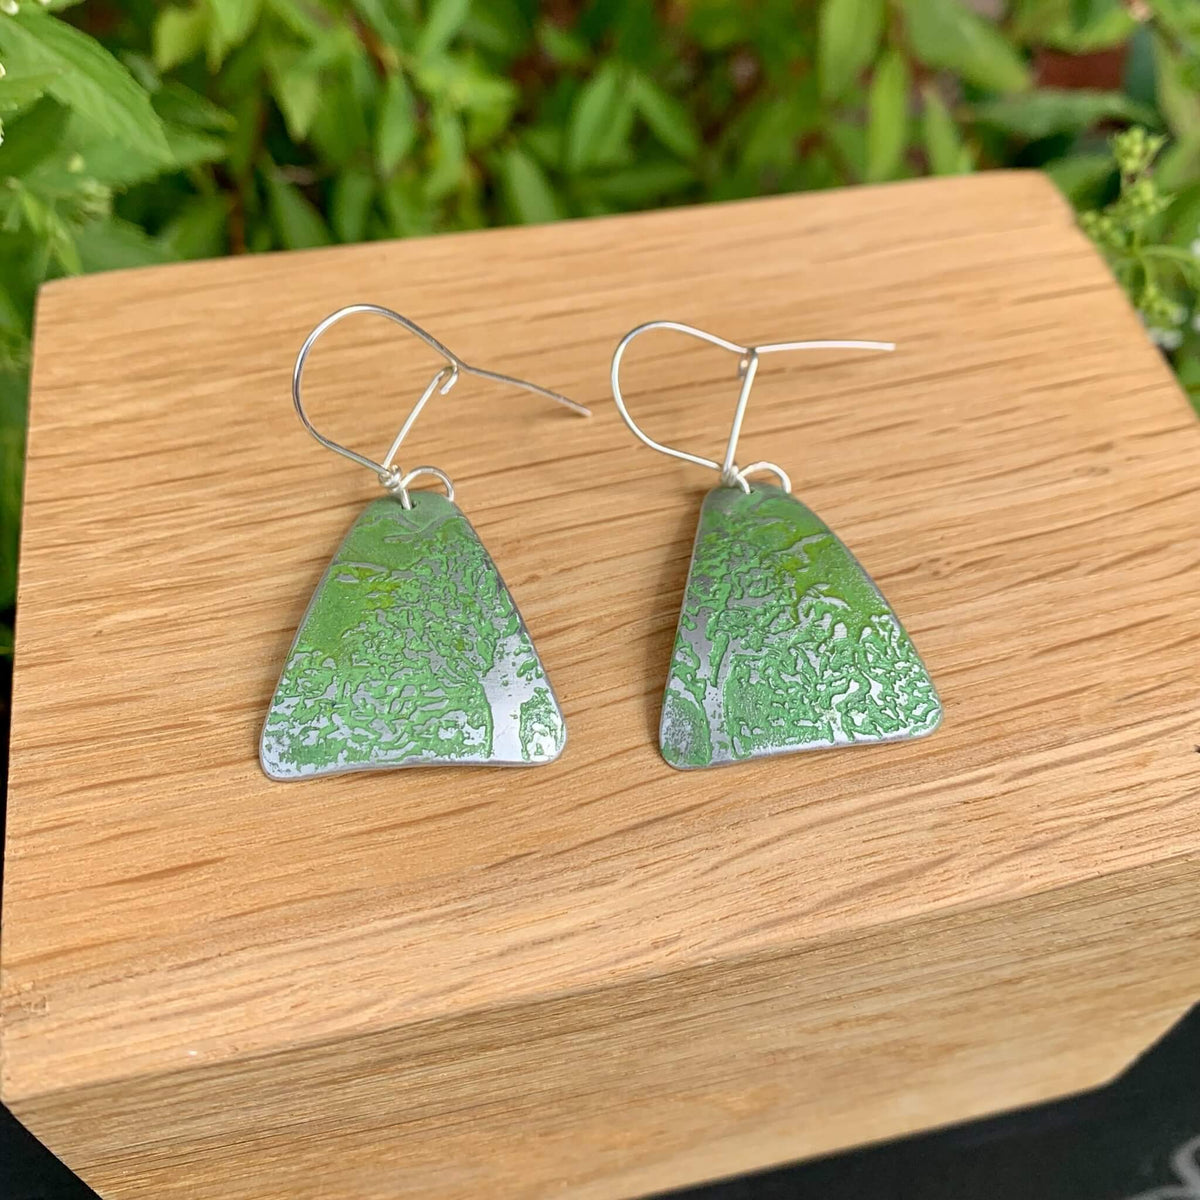 Green triangular aluminium earrings with etched tree